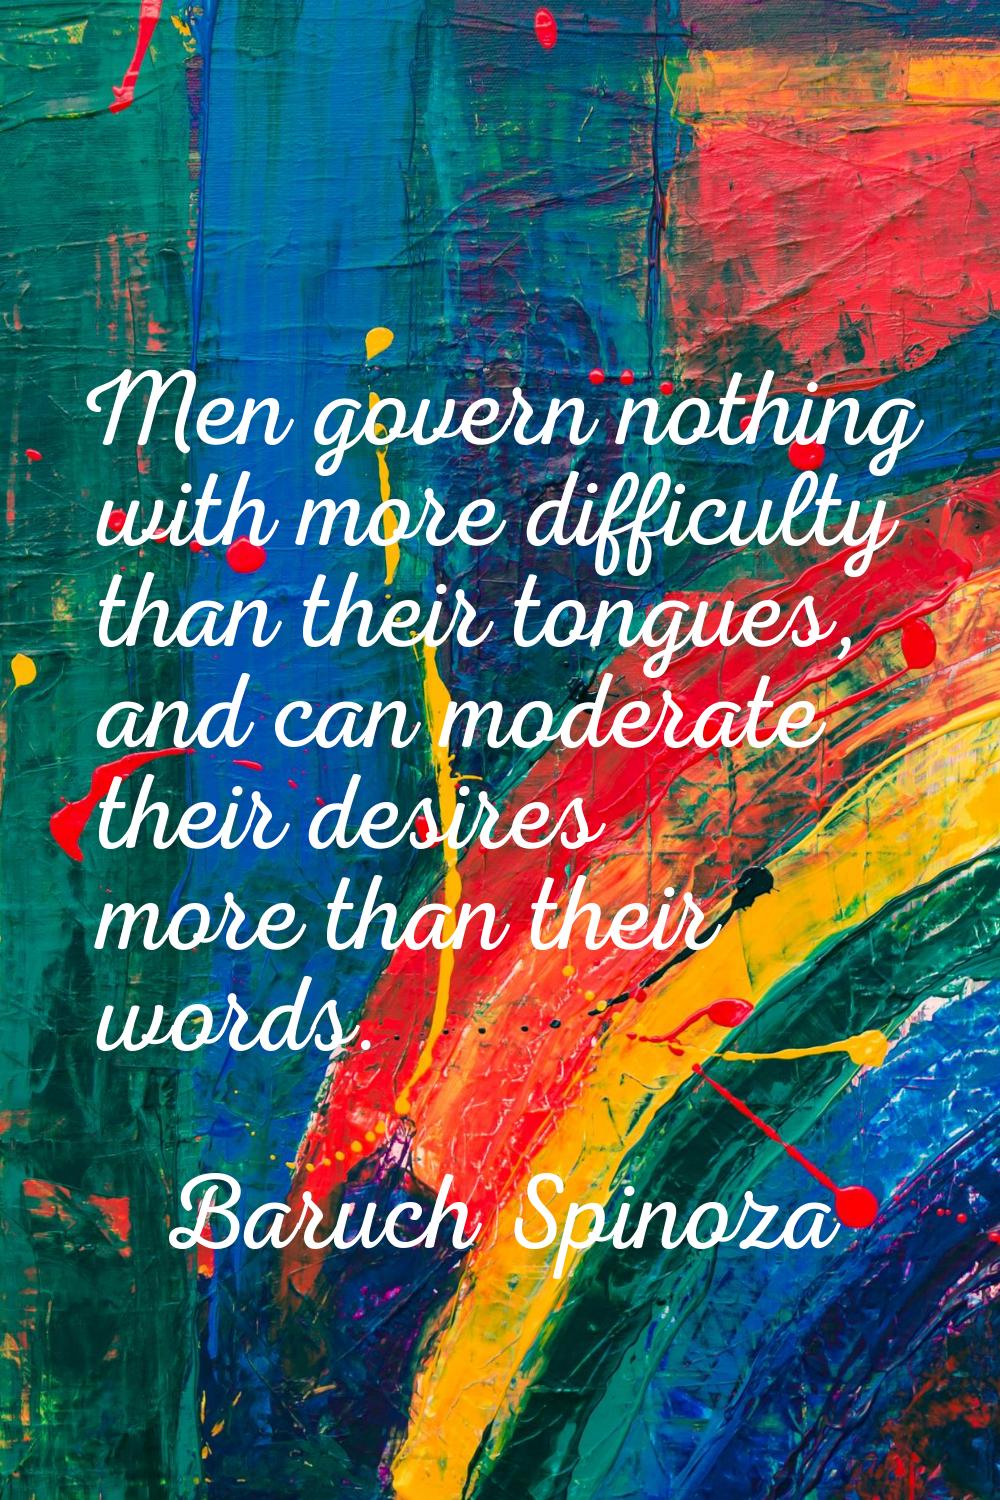 Men govern nothing with more difficulty than their tongues, and can moderate their desires more tha